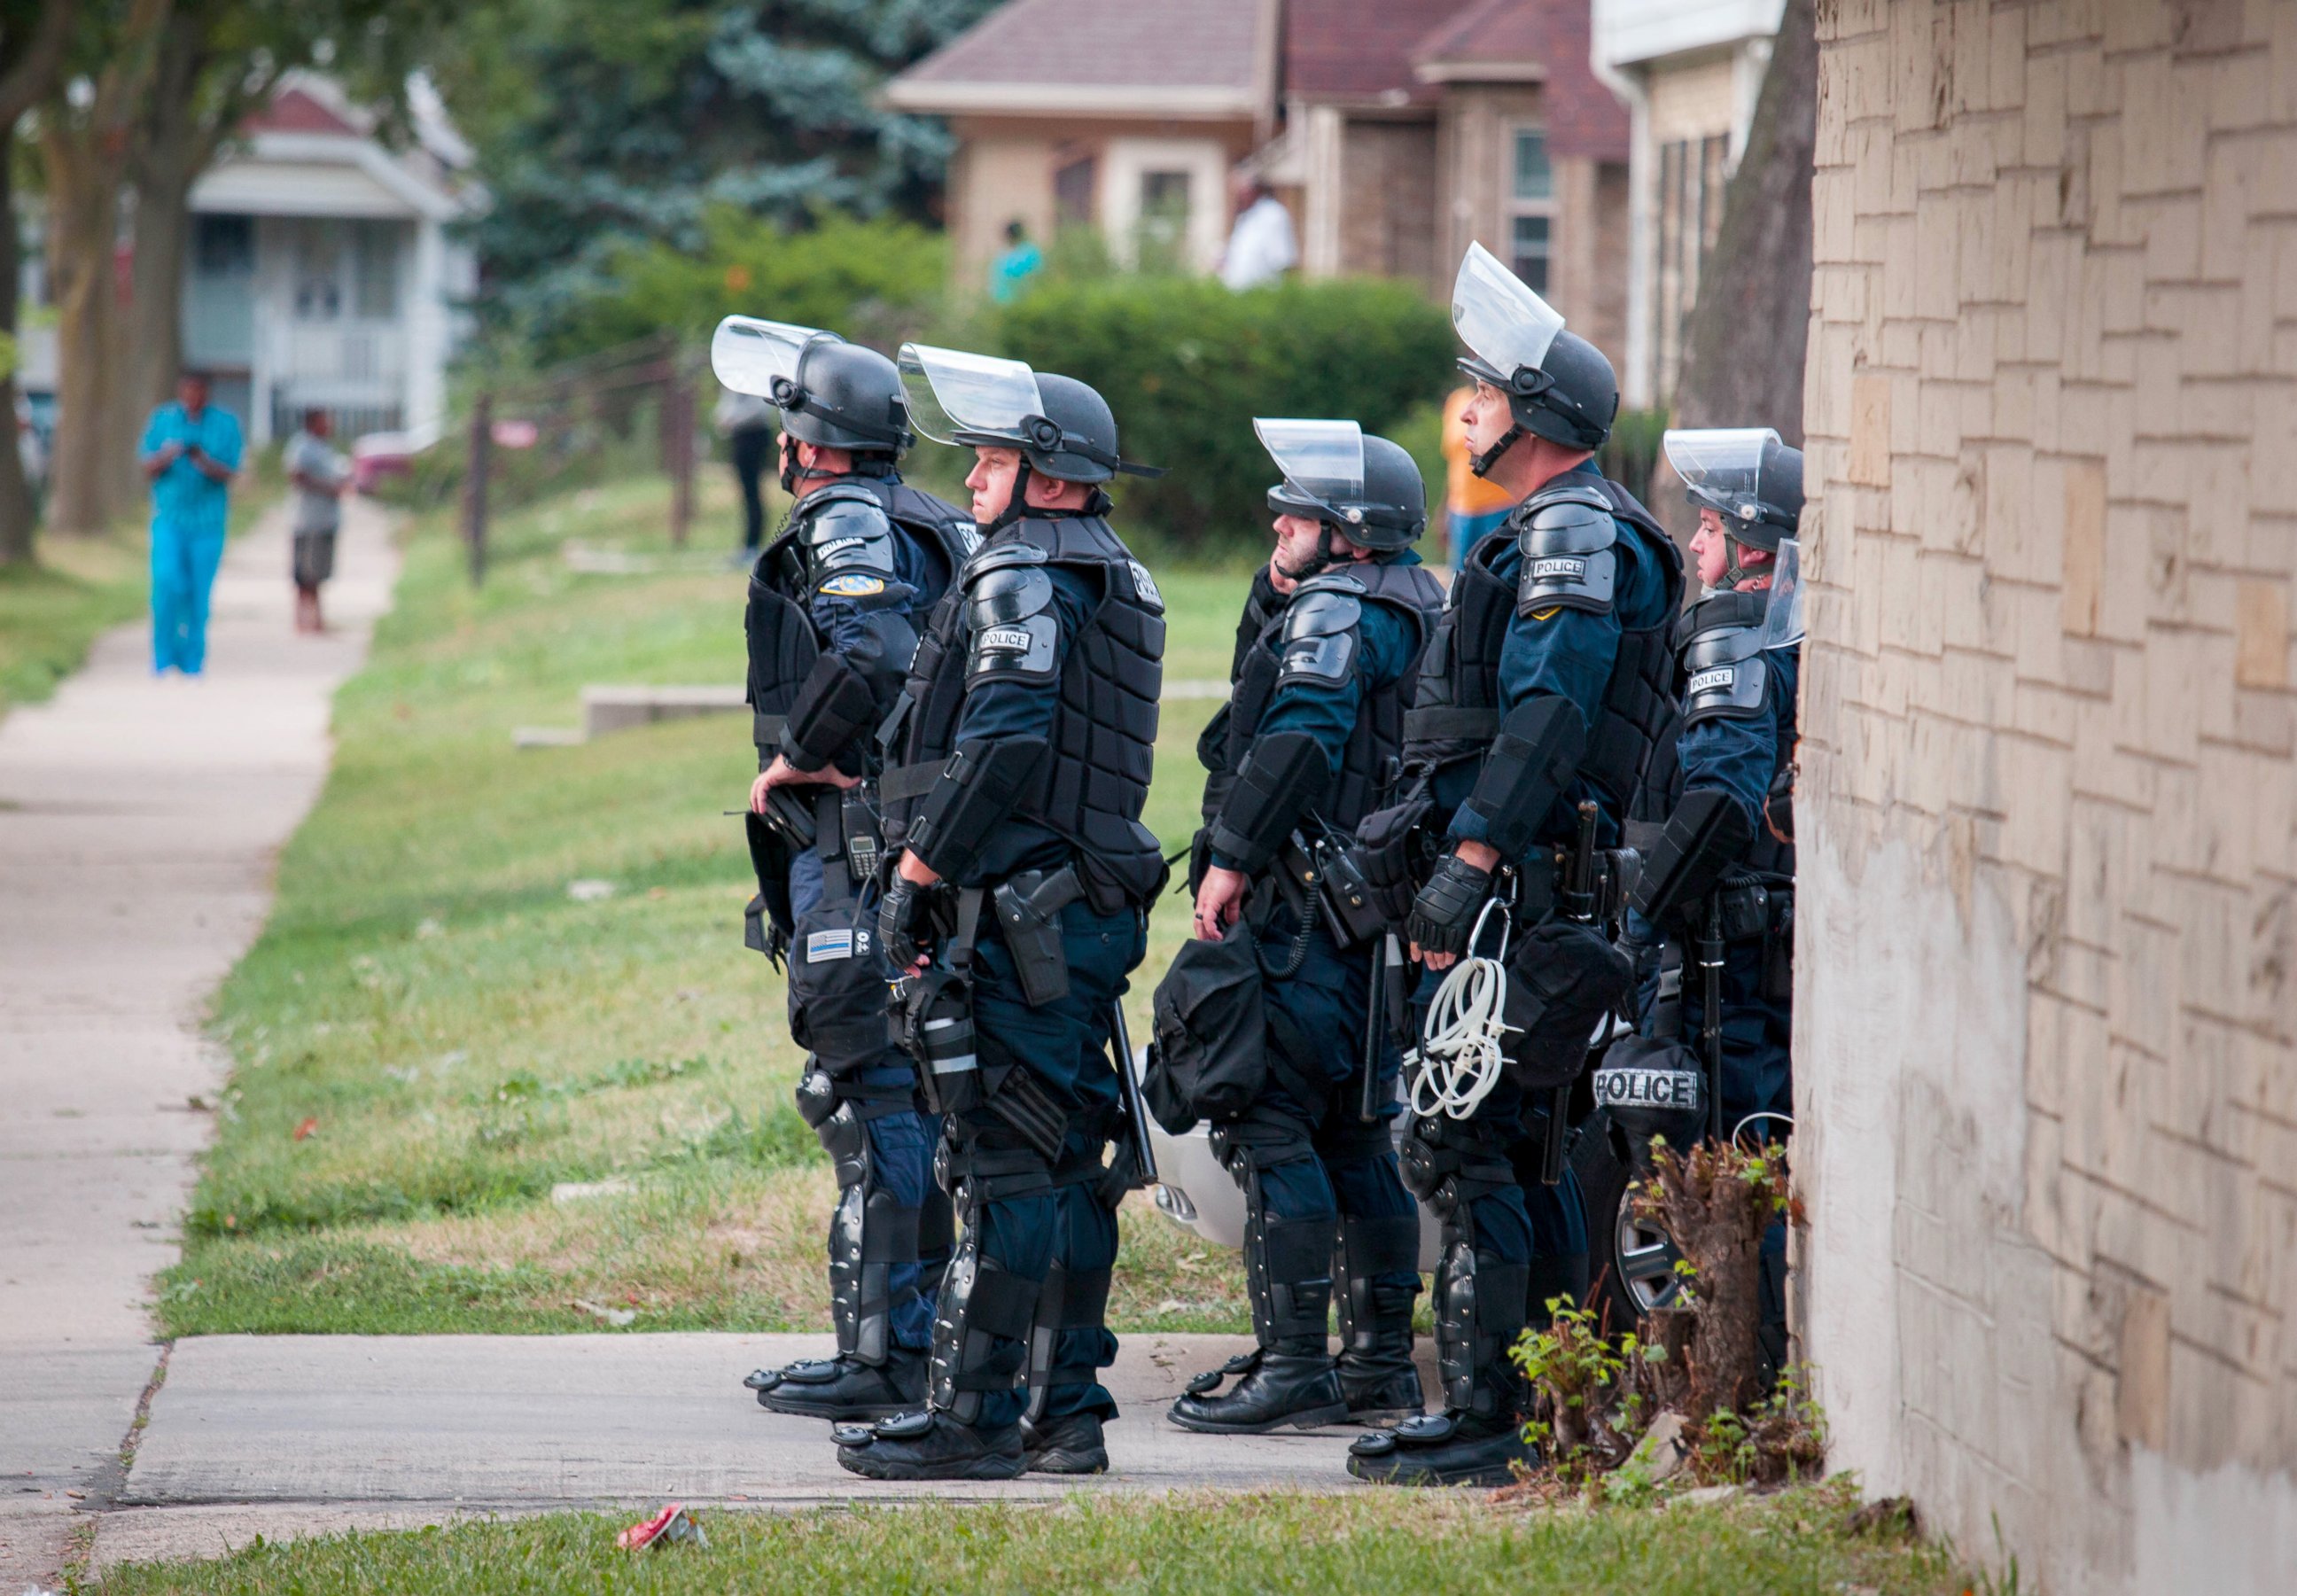 PHOTO: Police in riot gear wait in an alley after a second night of clashes between protestors and police, Aug. 15, 2016, in Milwaukee, Wisconsin.